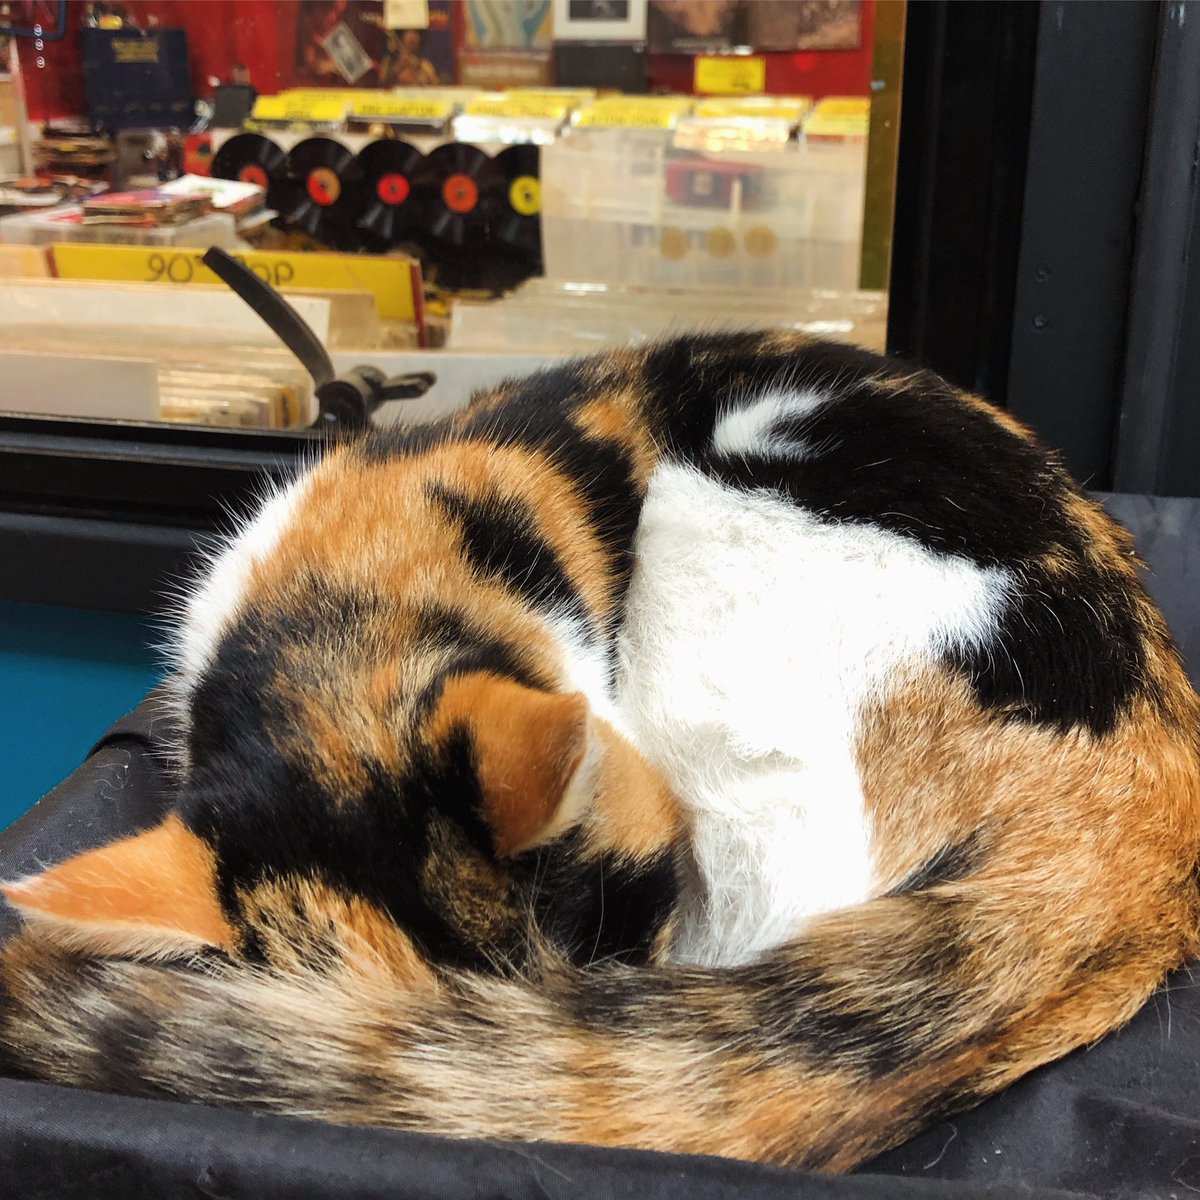 Sleepy @TootingMarket cat by the racks at ‘Dr. Vinyl’ this afternoon 🐾